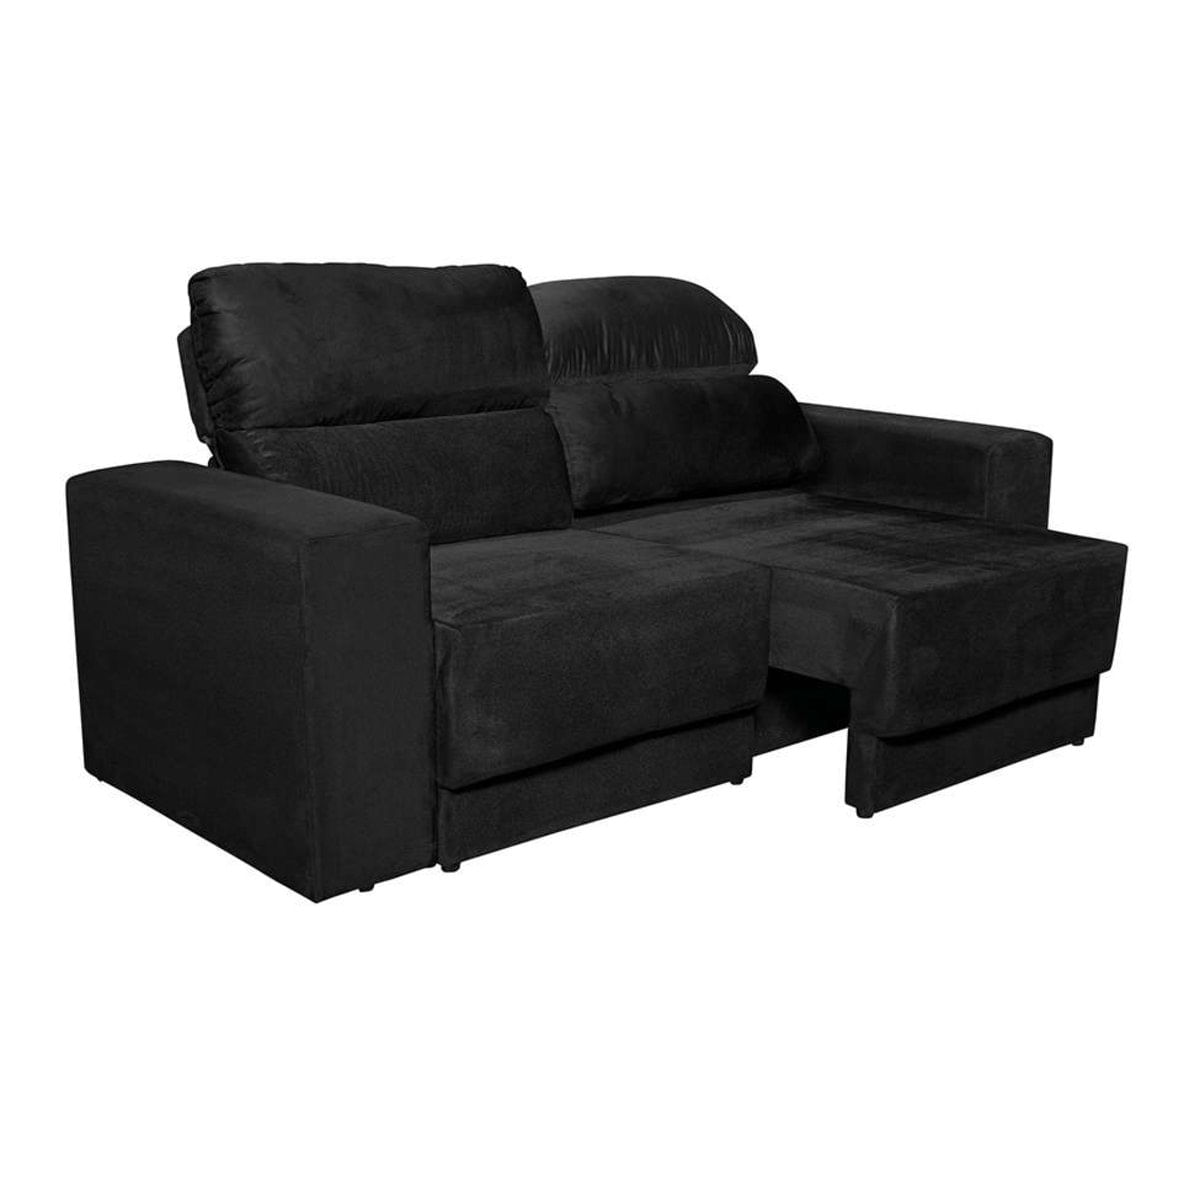 Madrid Suede Veludo Preto, Madrid 2 Piece Leather Sectional